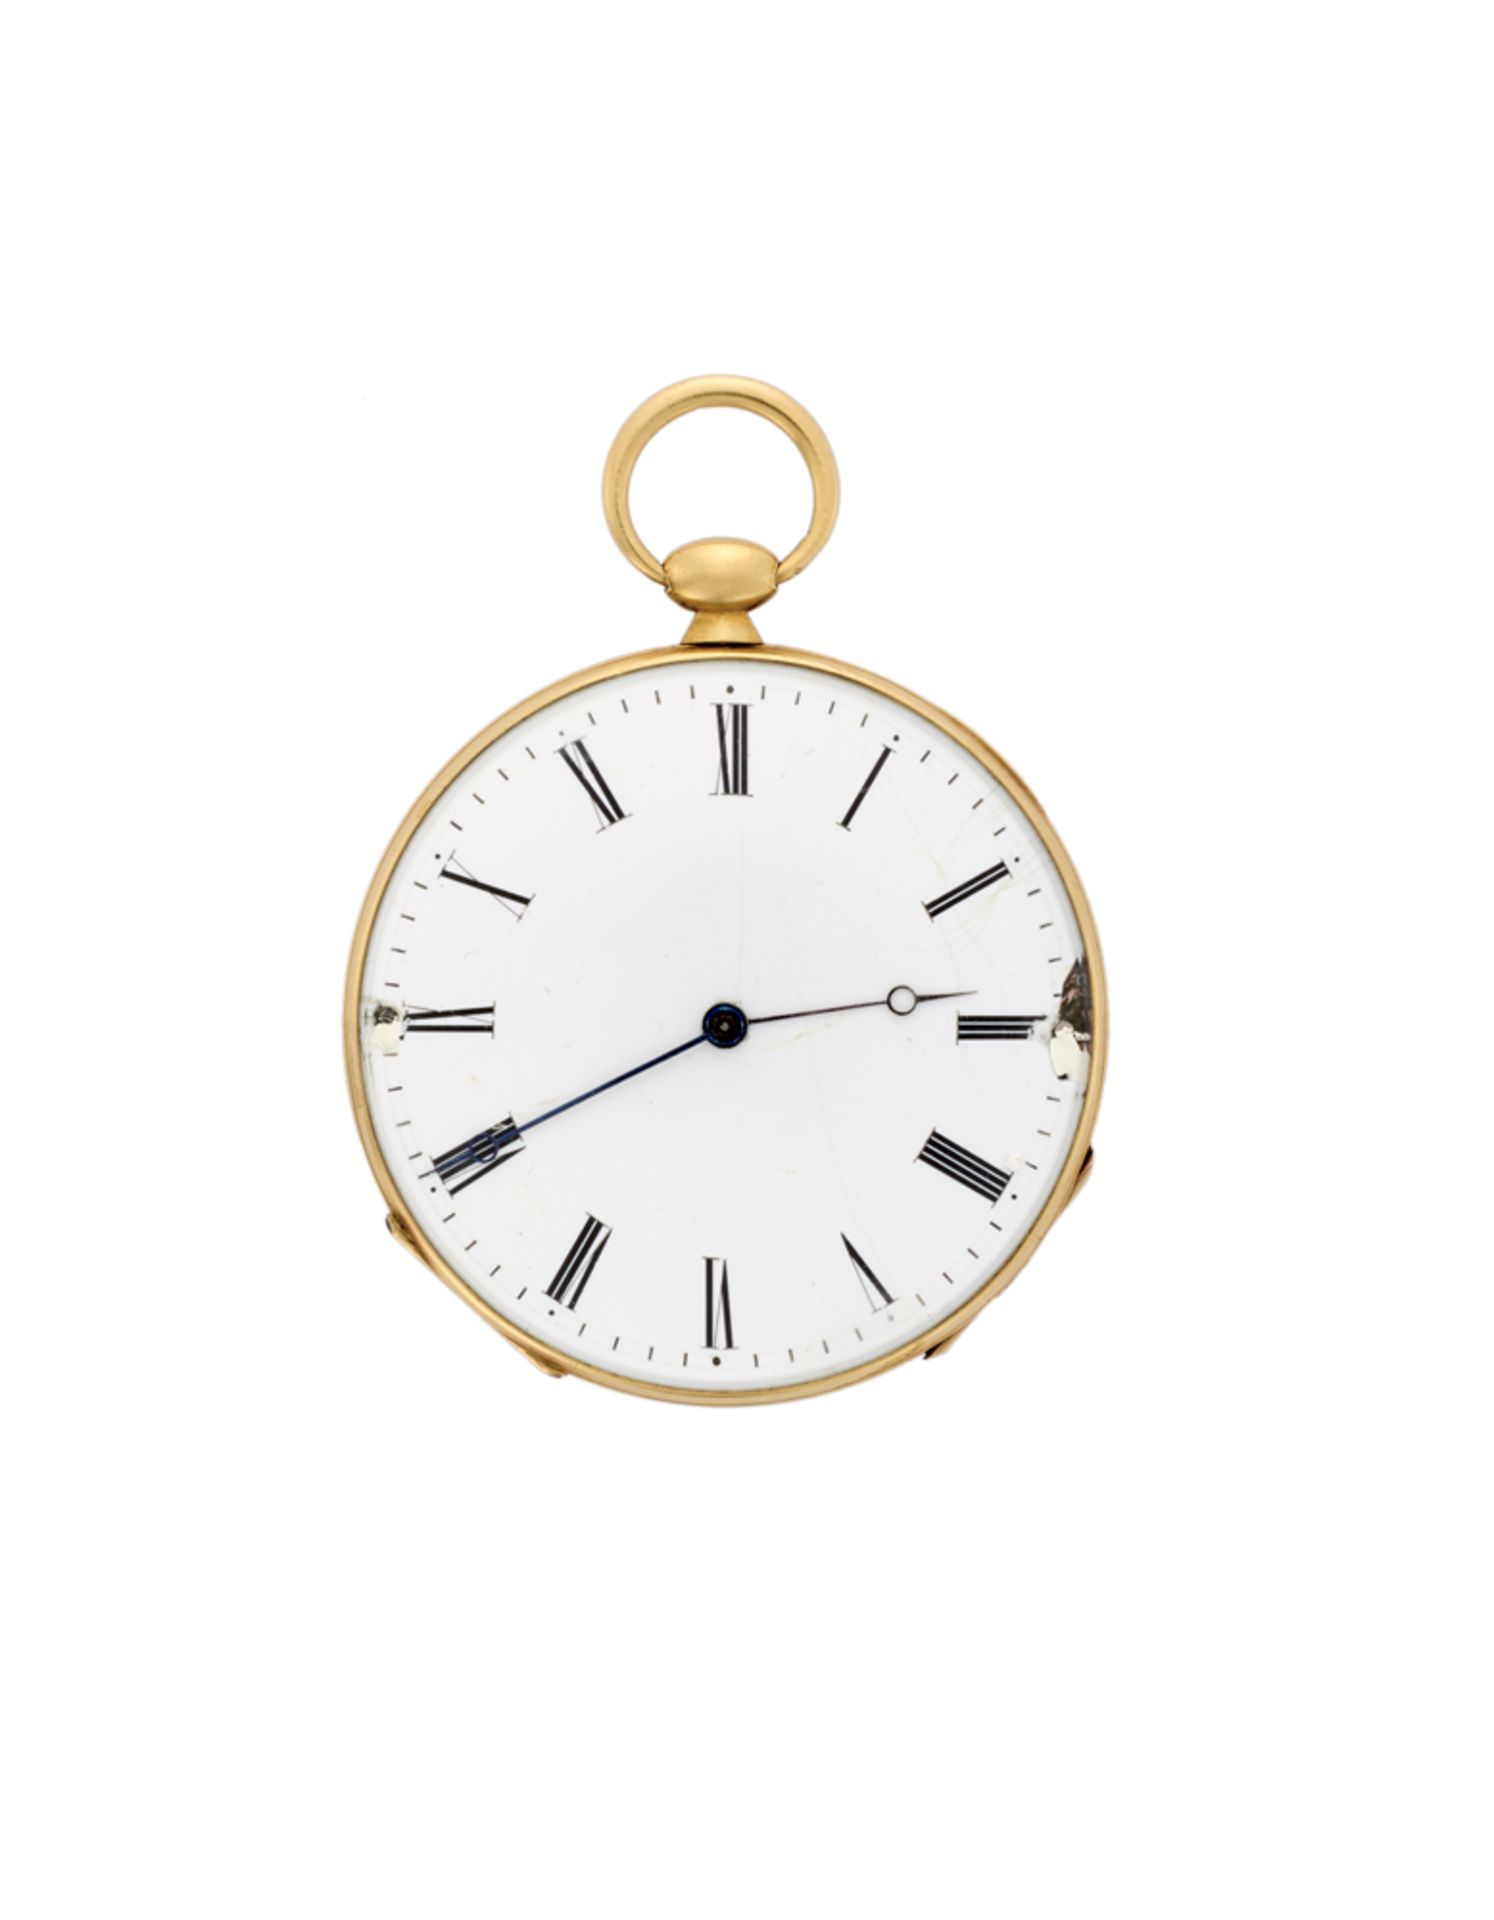 ANONYMOUS<br>Gent's 18K gold pocket watch with enamel<br>18th century<br>Key-wind movement<br>White 